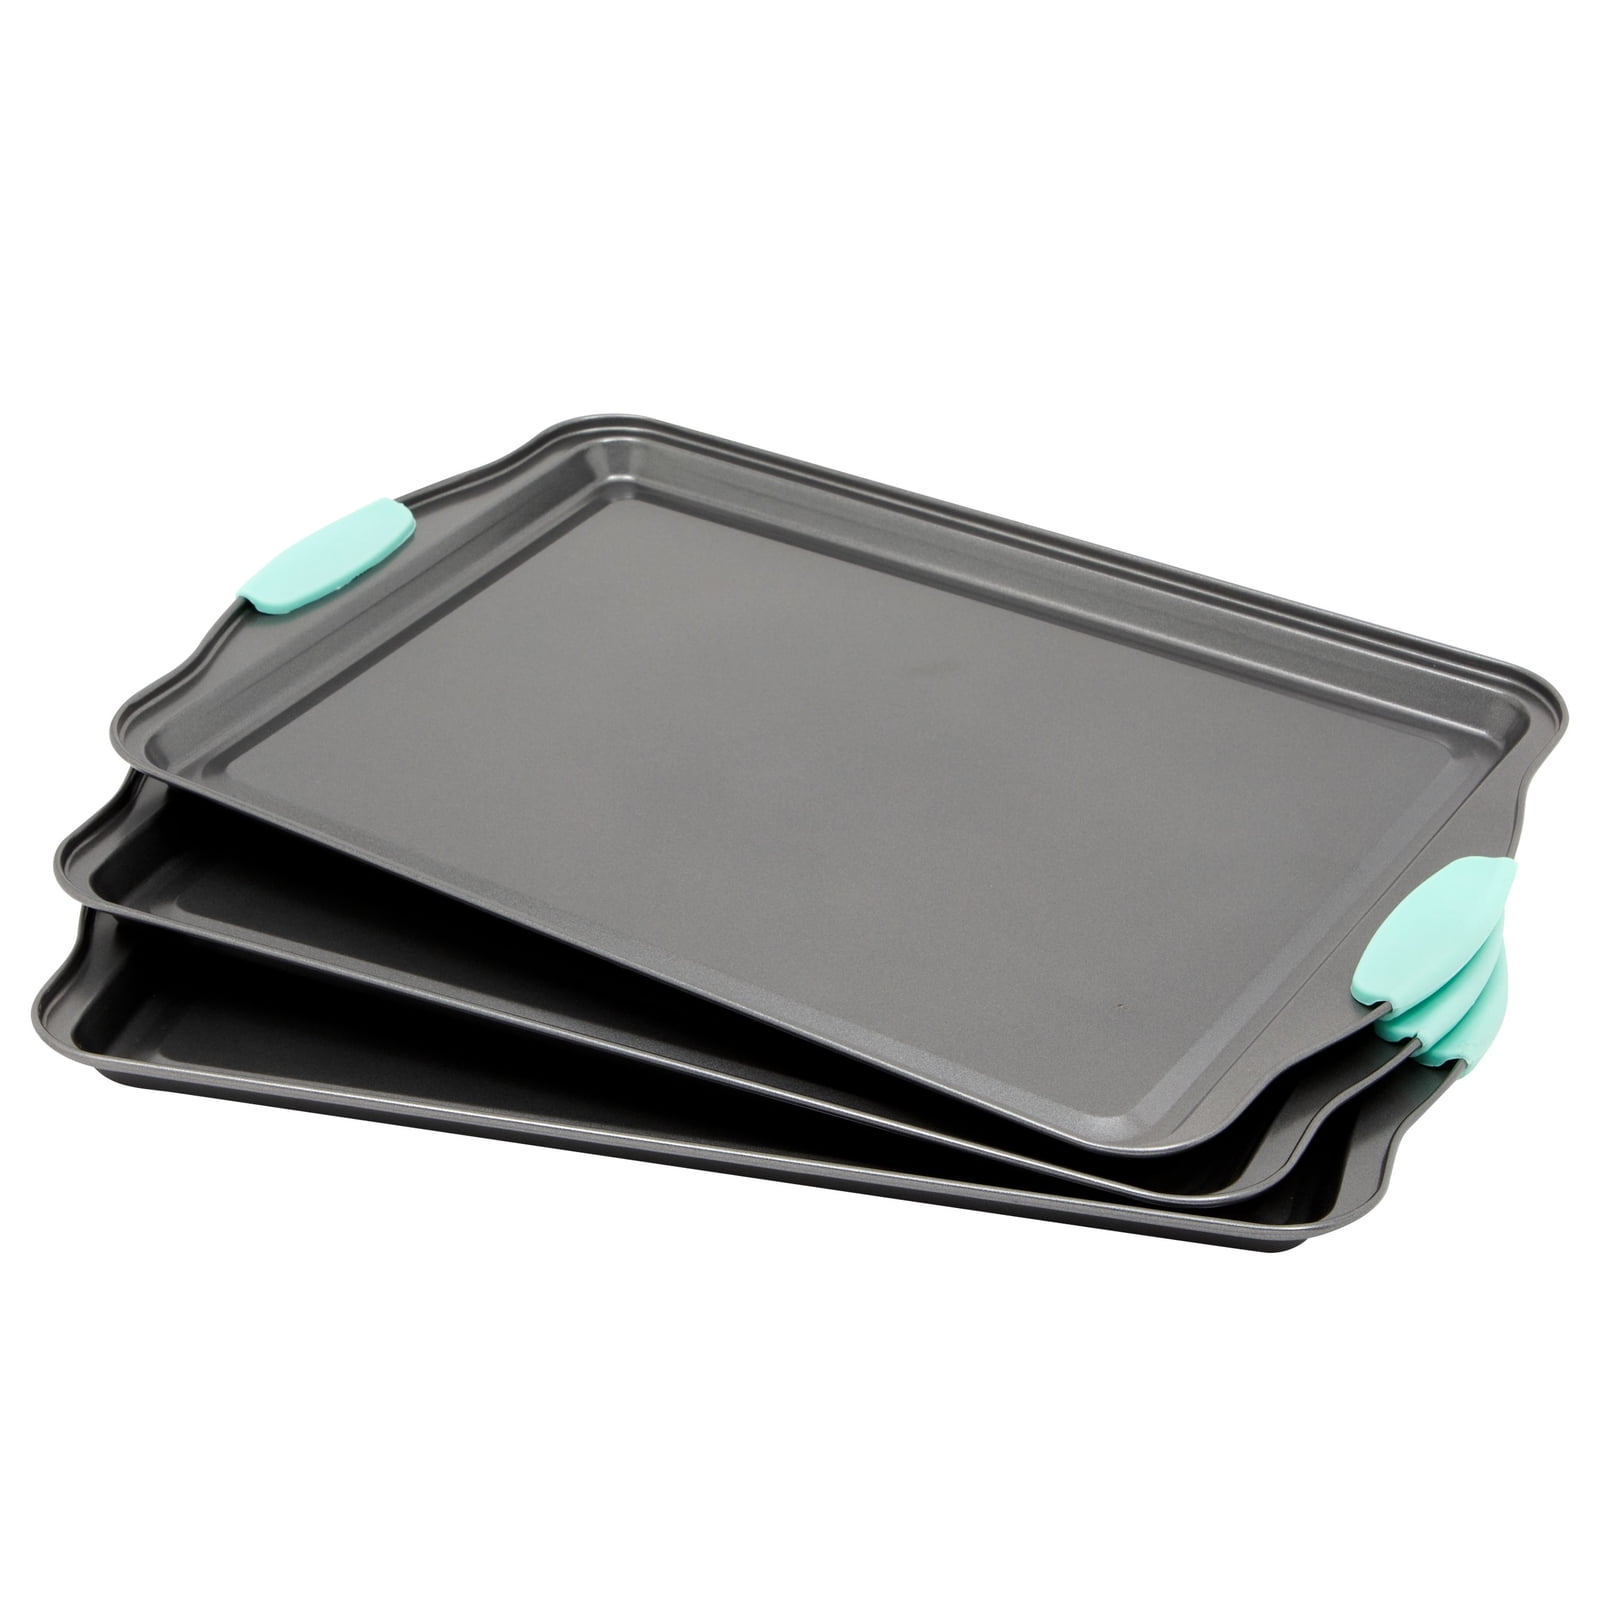 Set of 3 Nonstick Cookie Sheets for Baking, Bakeware Pans with Silicone  Rubber Handles, 10x14 inches